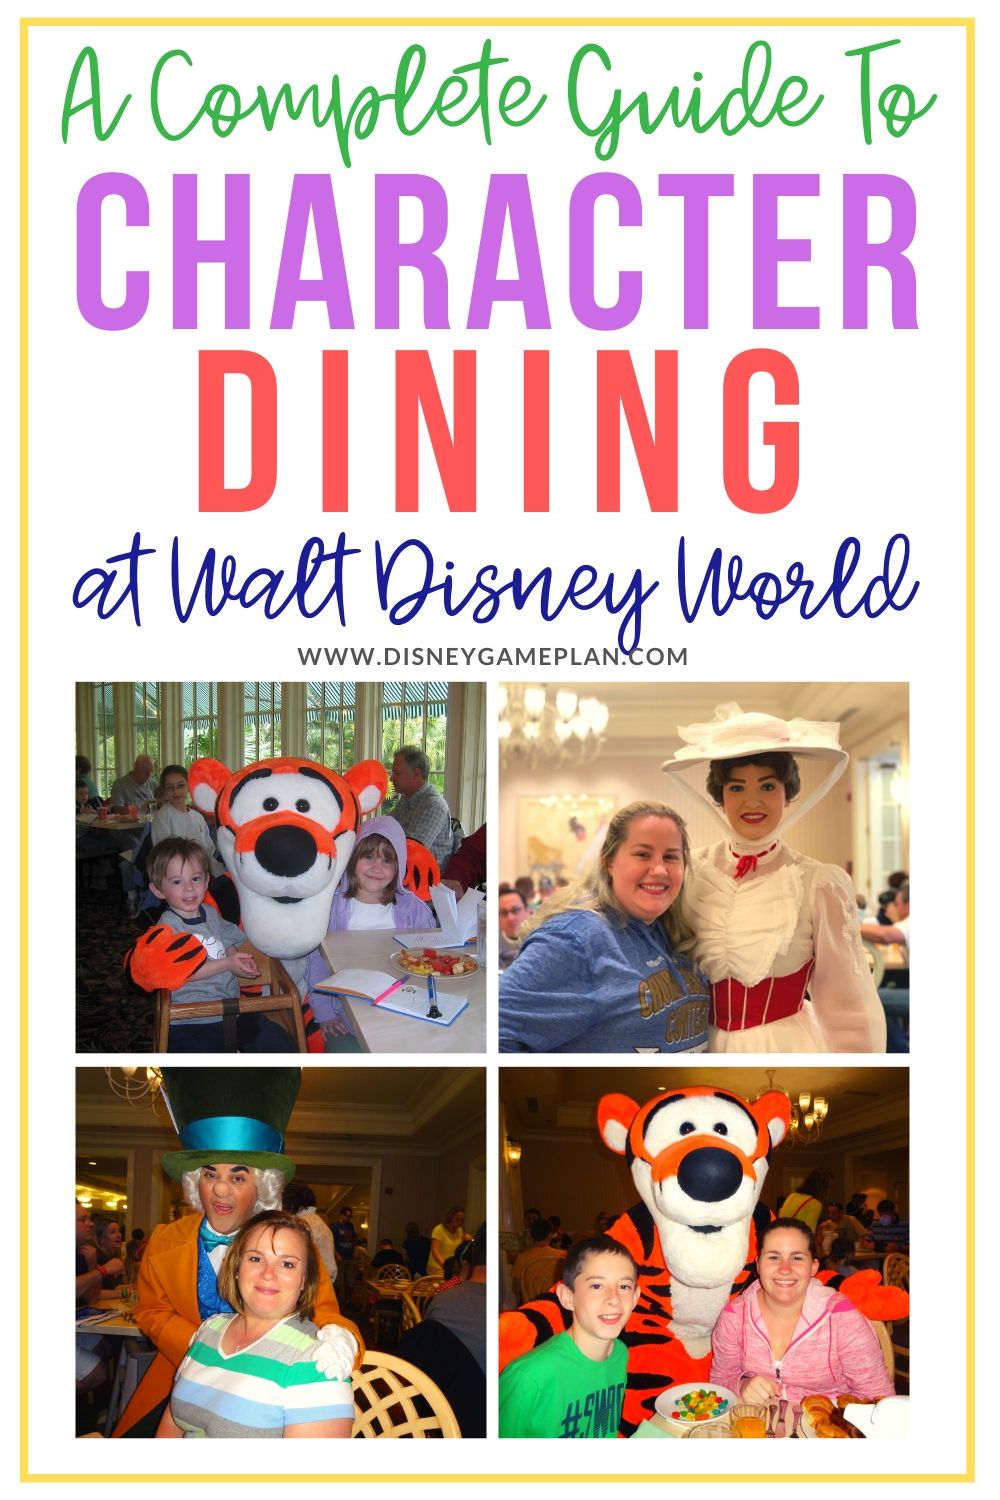 find the perfect Disney World character meals. read this comprehensive new guide on Where to Dine And Meet Disney characters in Walt Disney World restaurants.